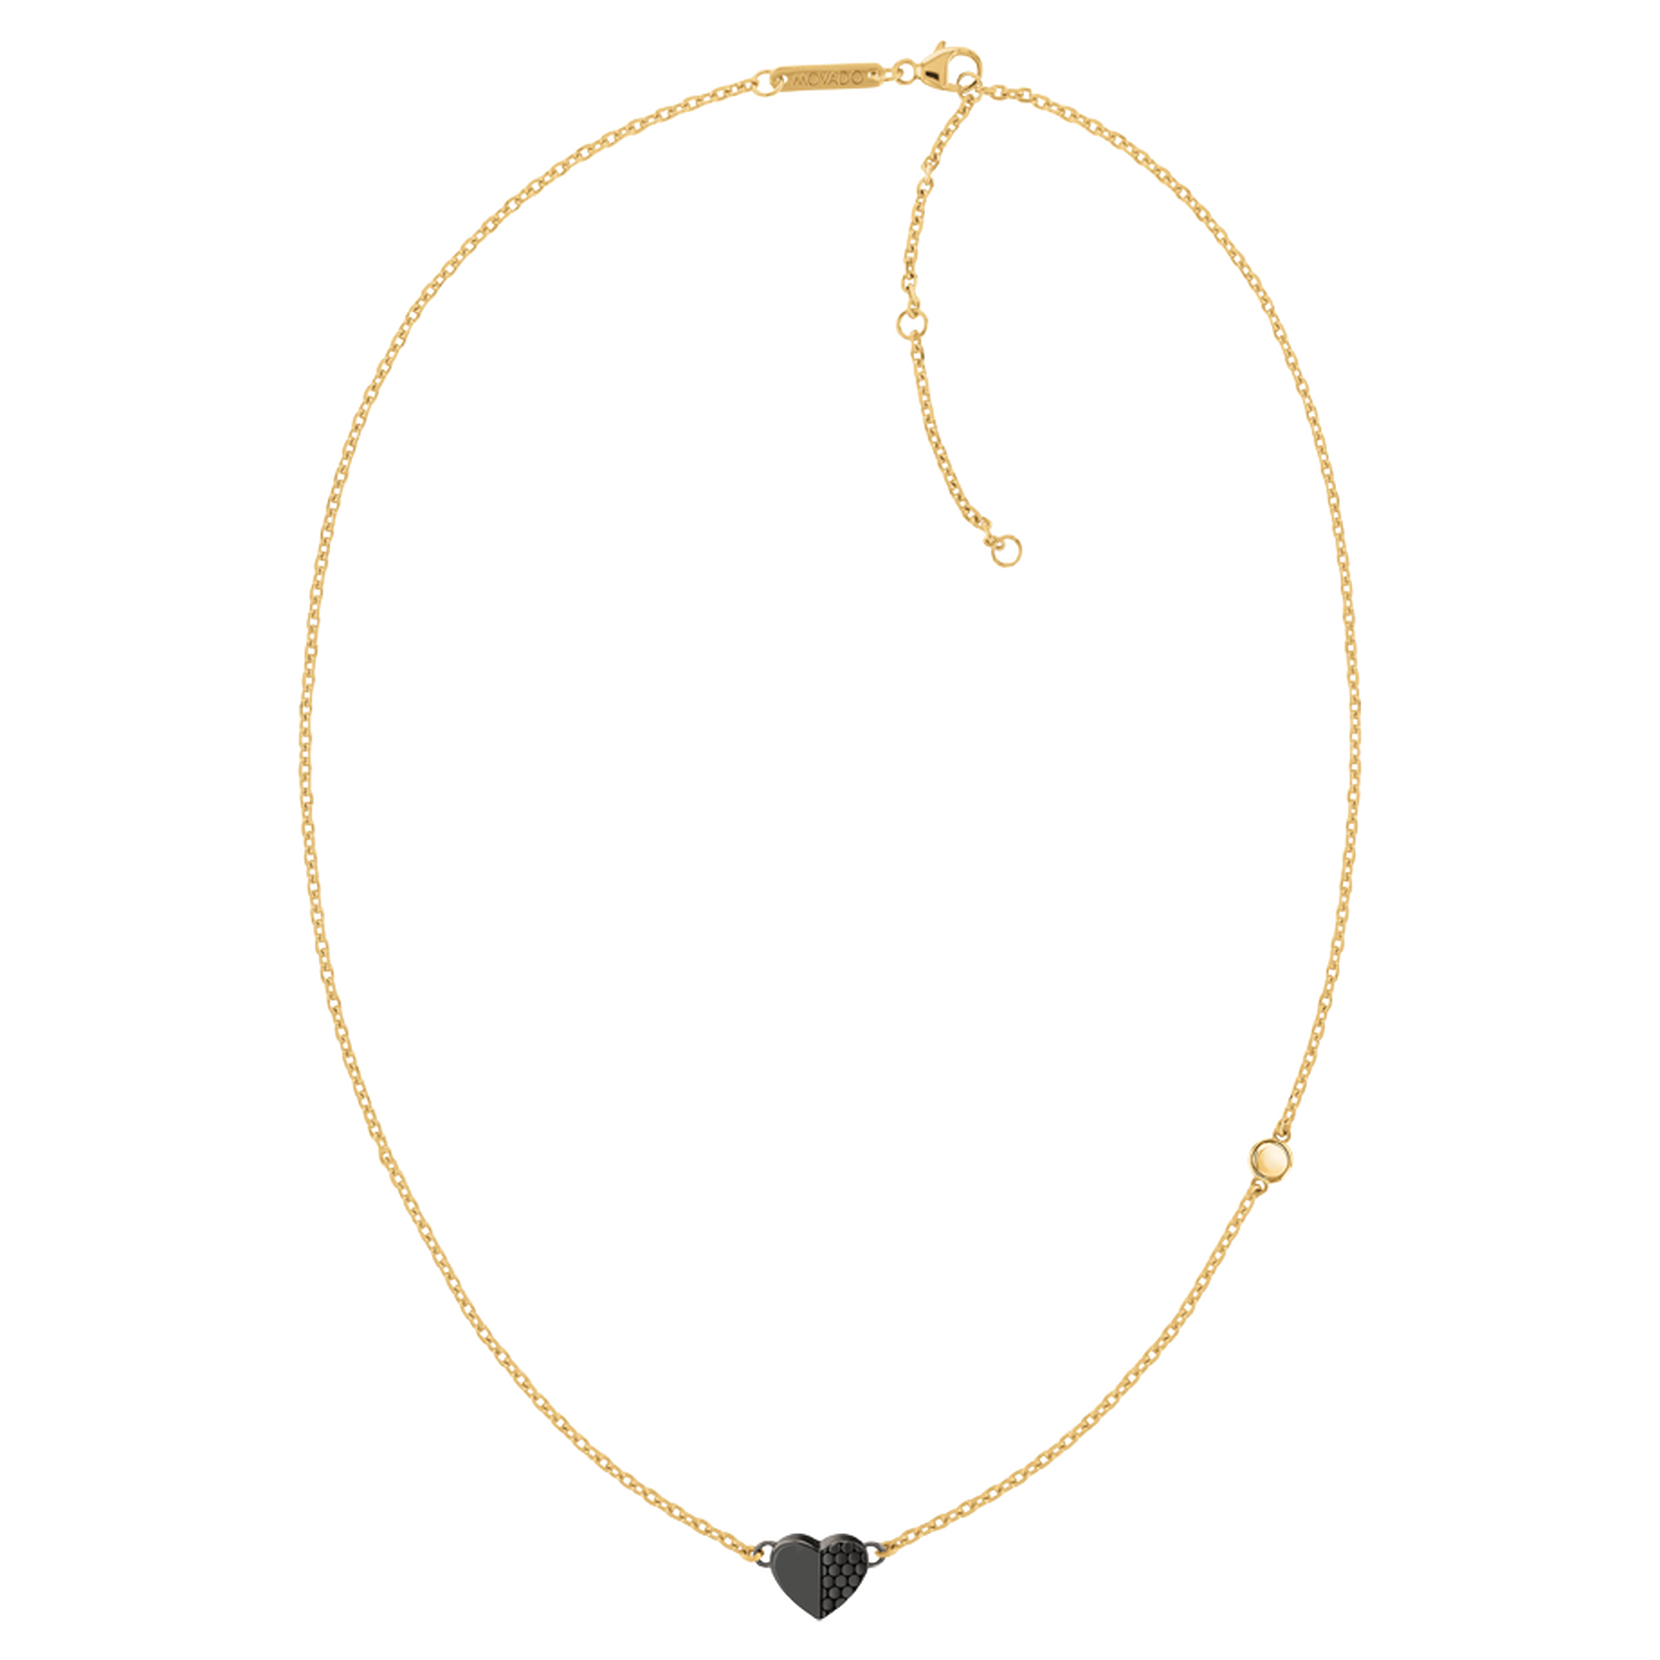 Movado | Movado Petite Heart Collection gold necklace with black heart